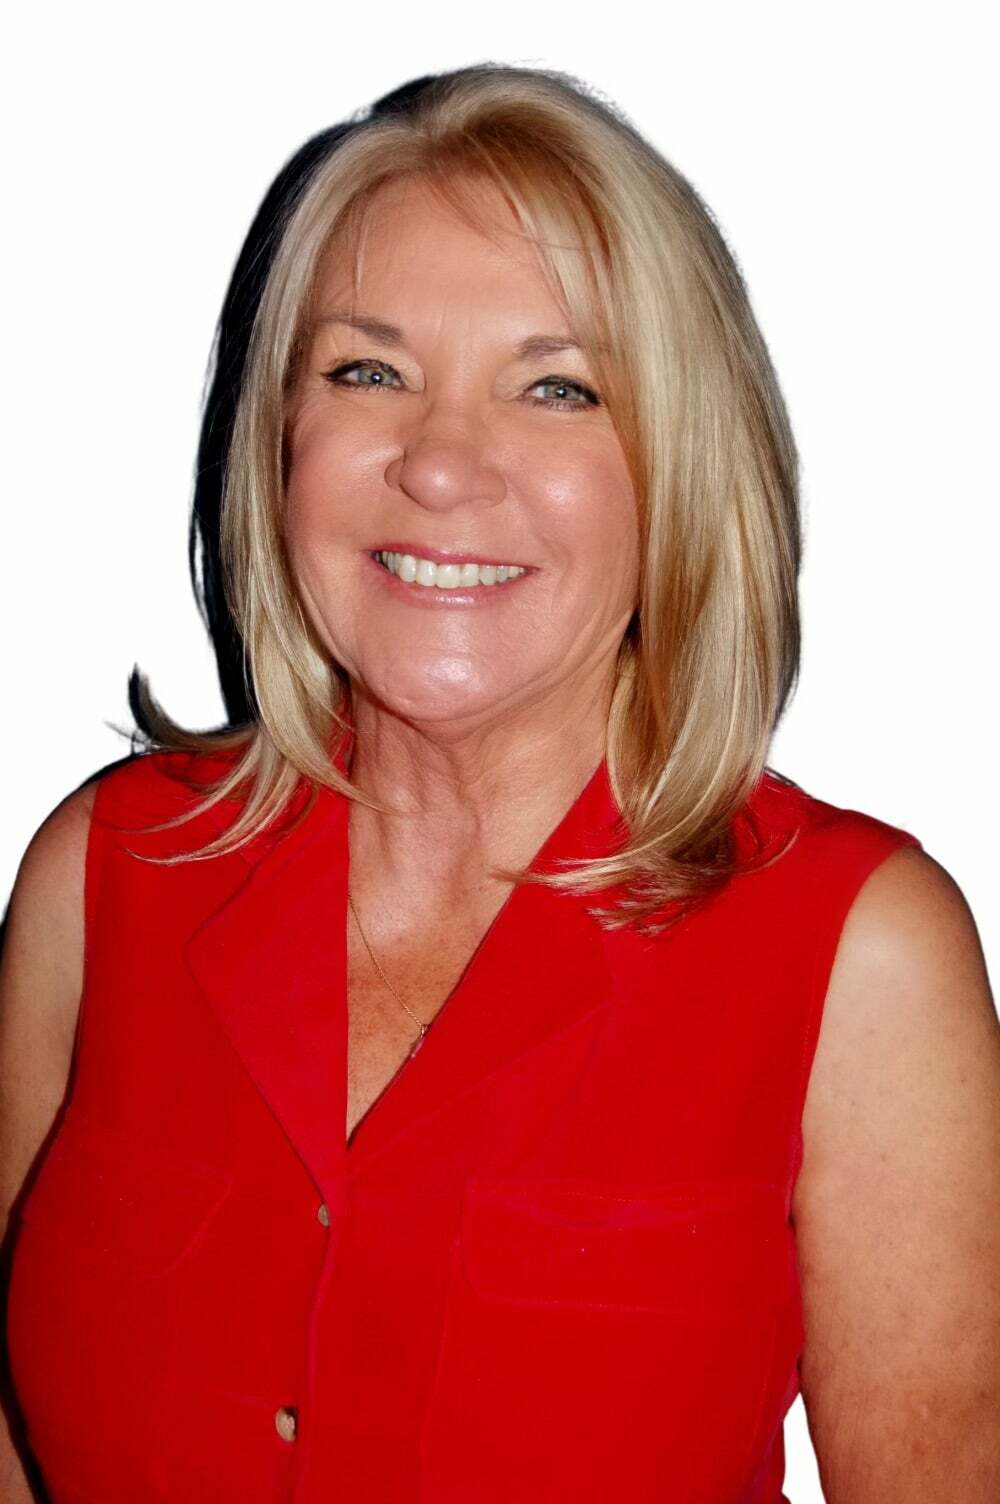 Kimberly Hatcher,  in Slidell, ERA TOP AGENT REALTY